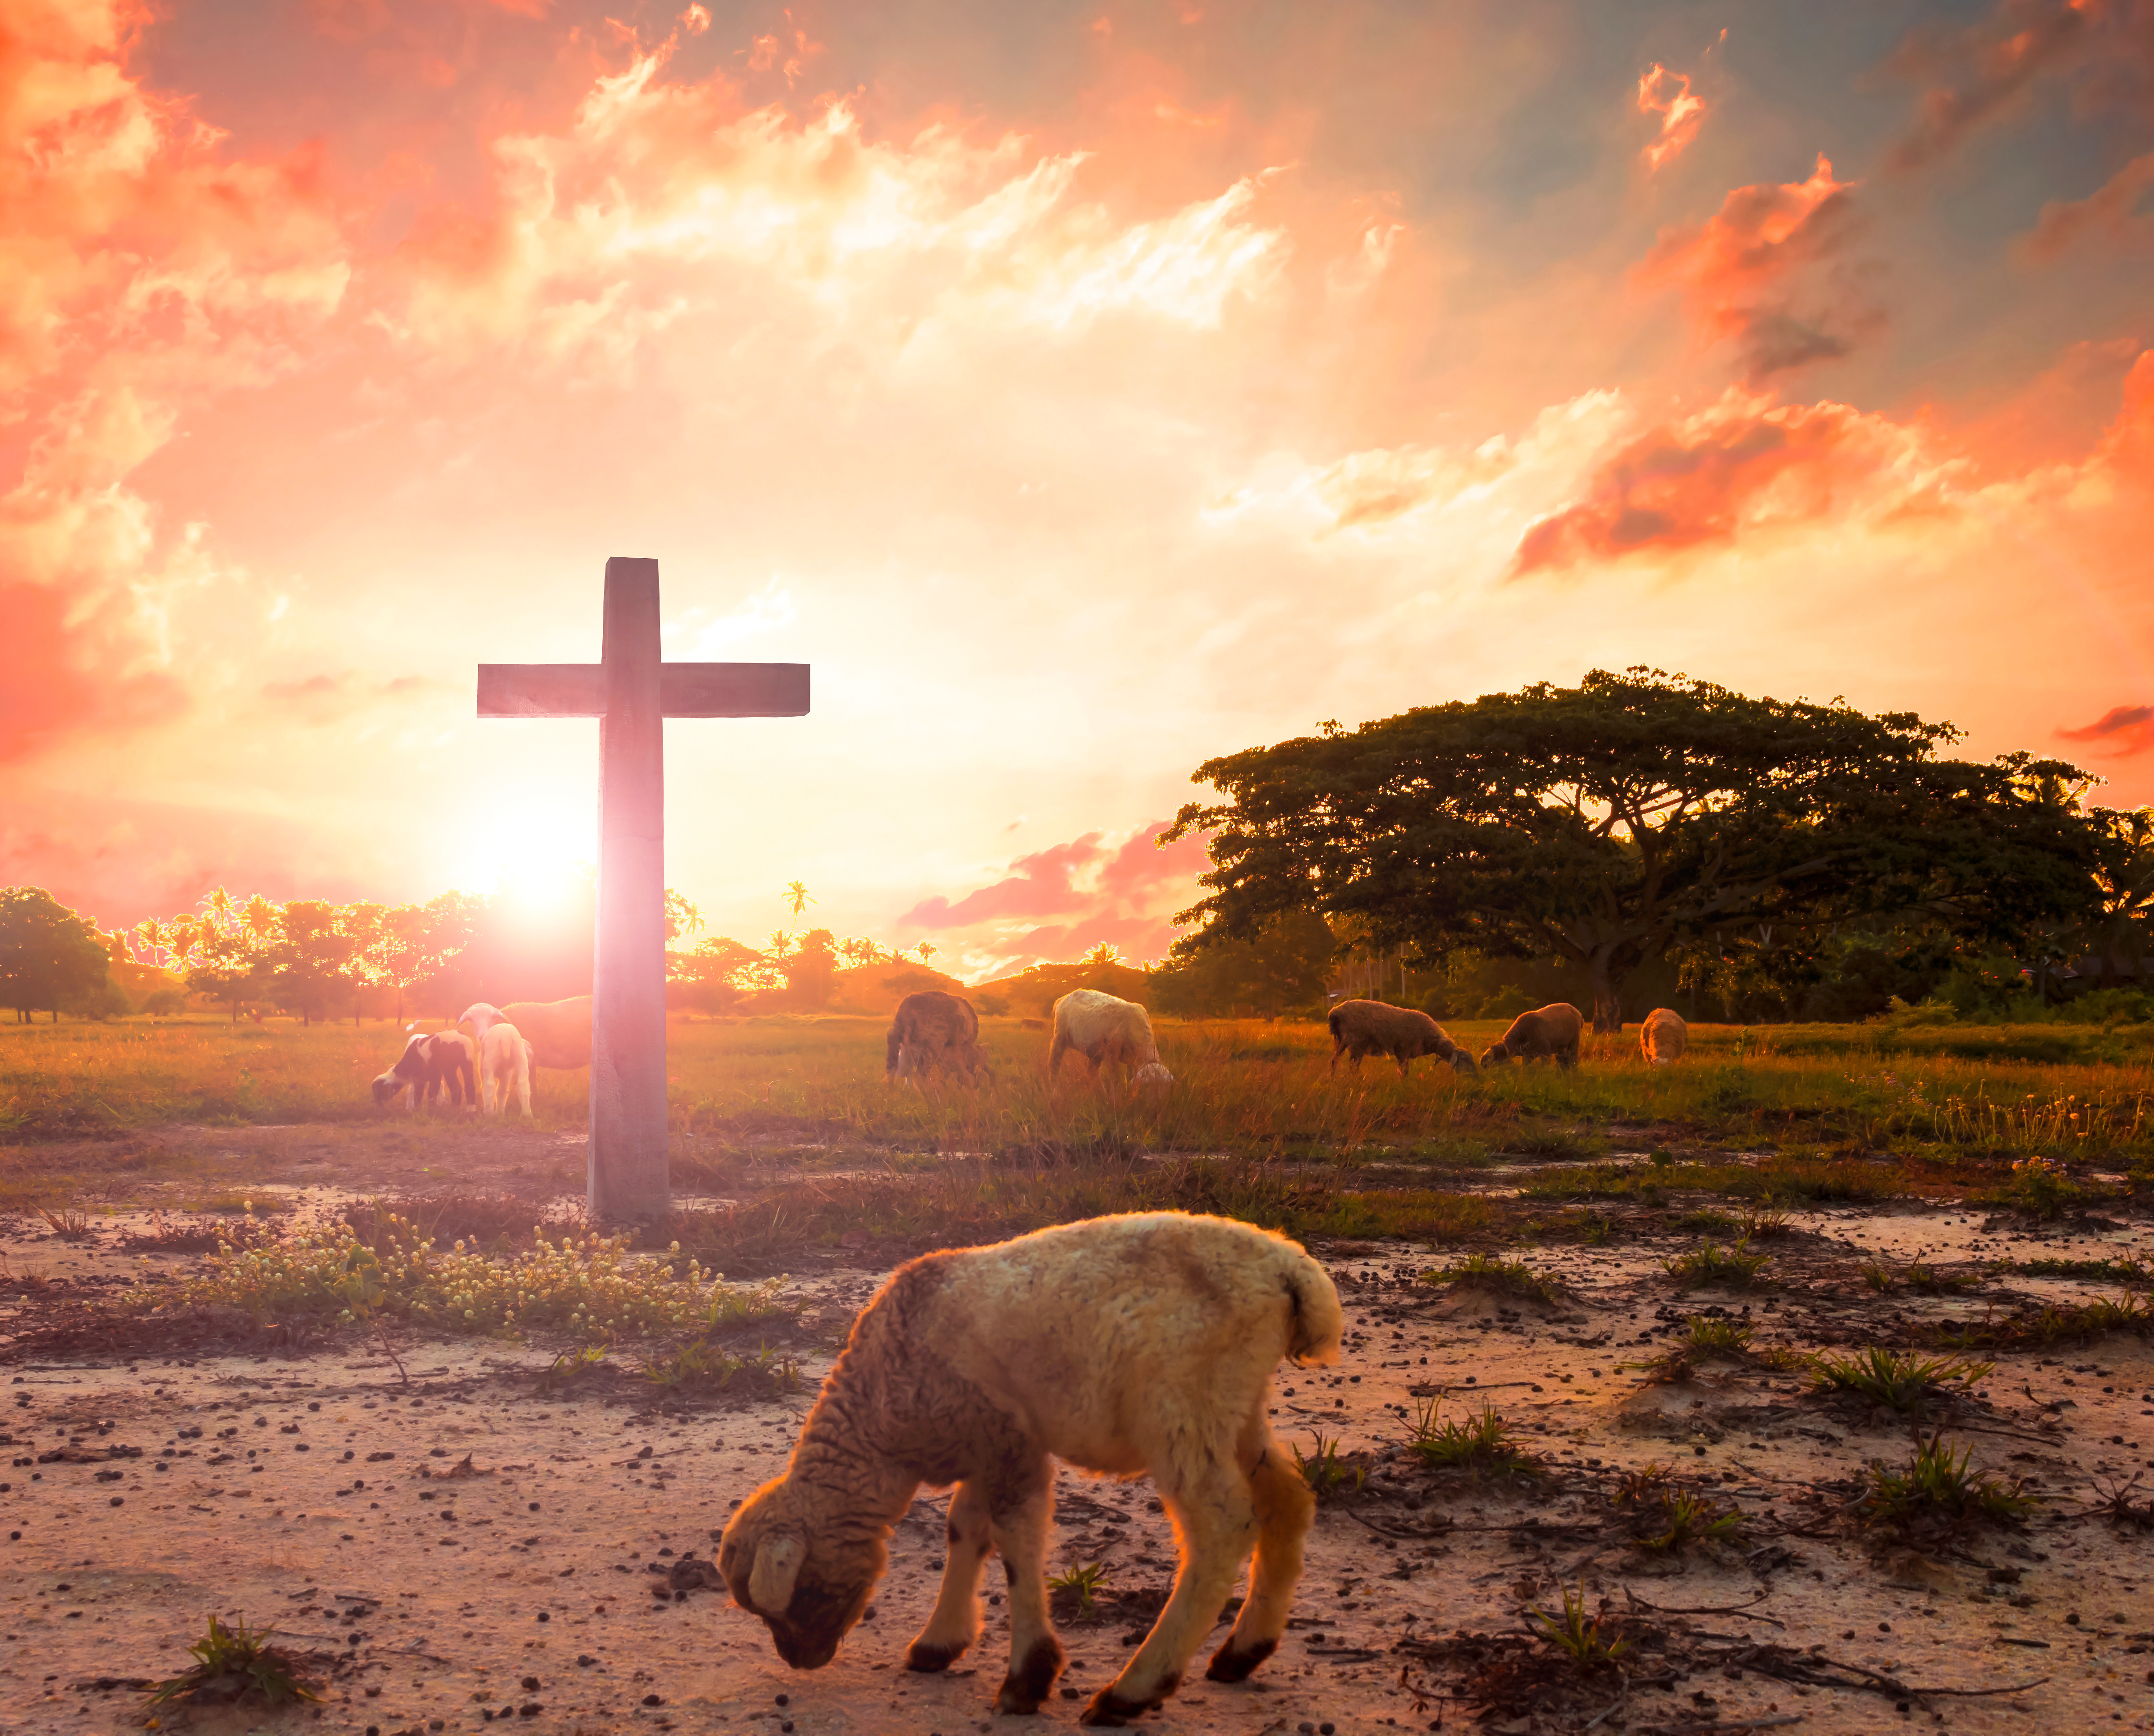 Desert Hills Bible Church | The Unjust, Willing, Sacrificial, Obedient Death on the Cross